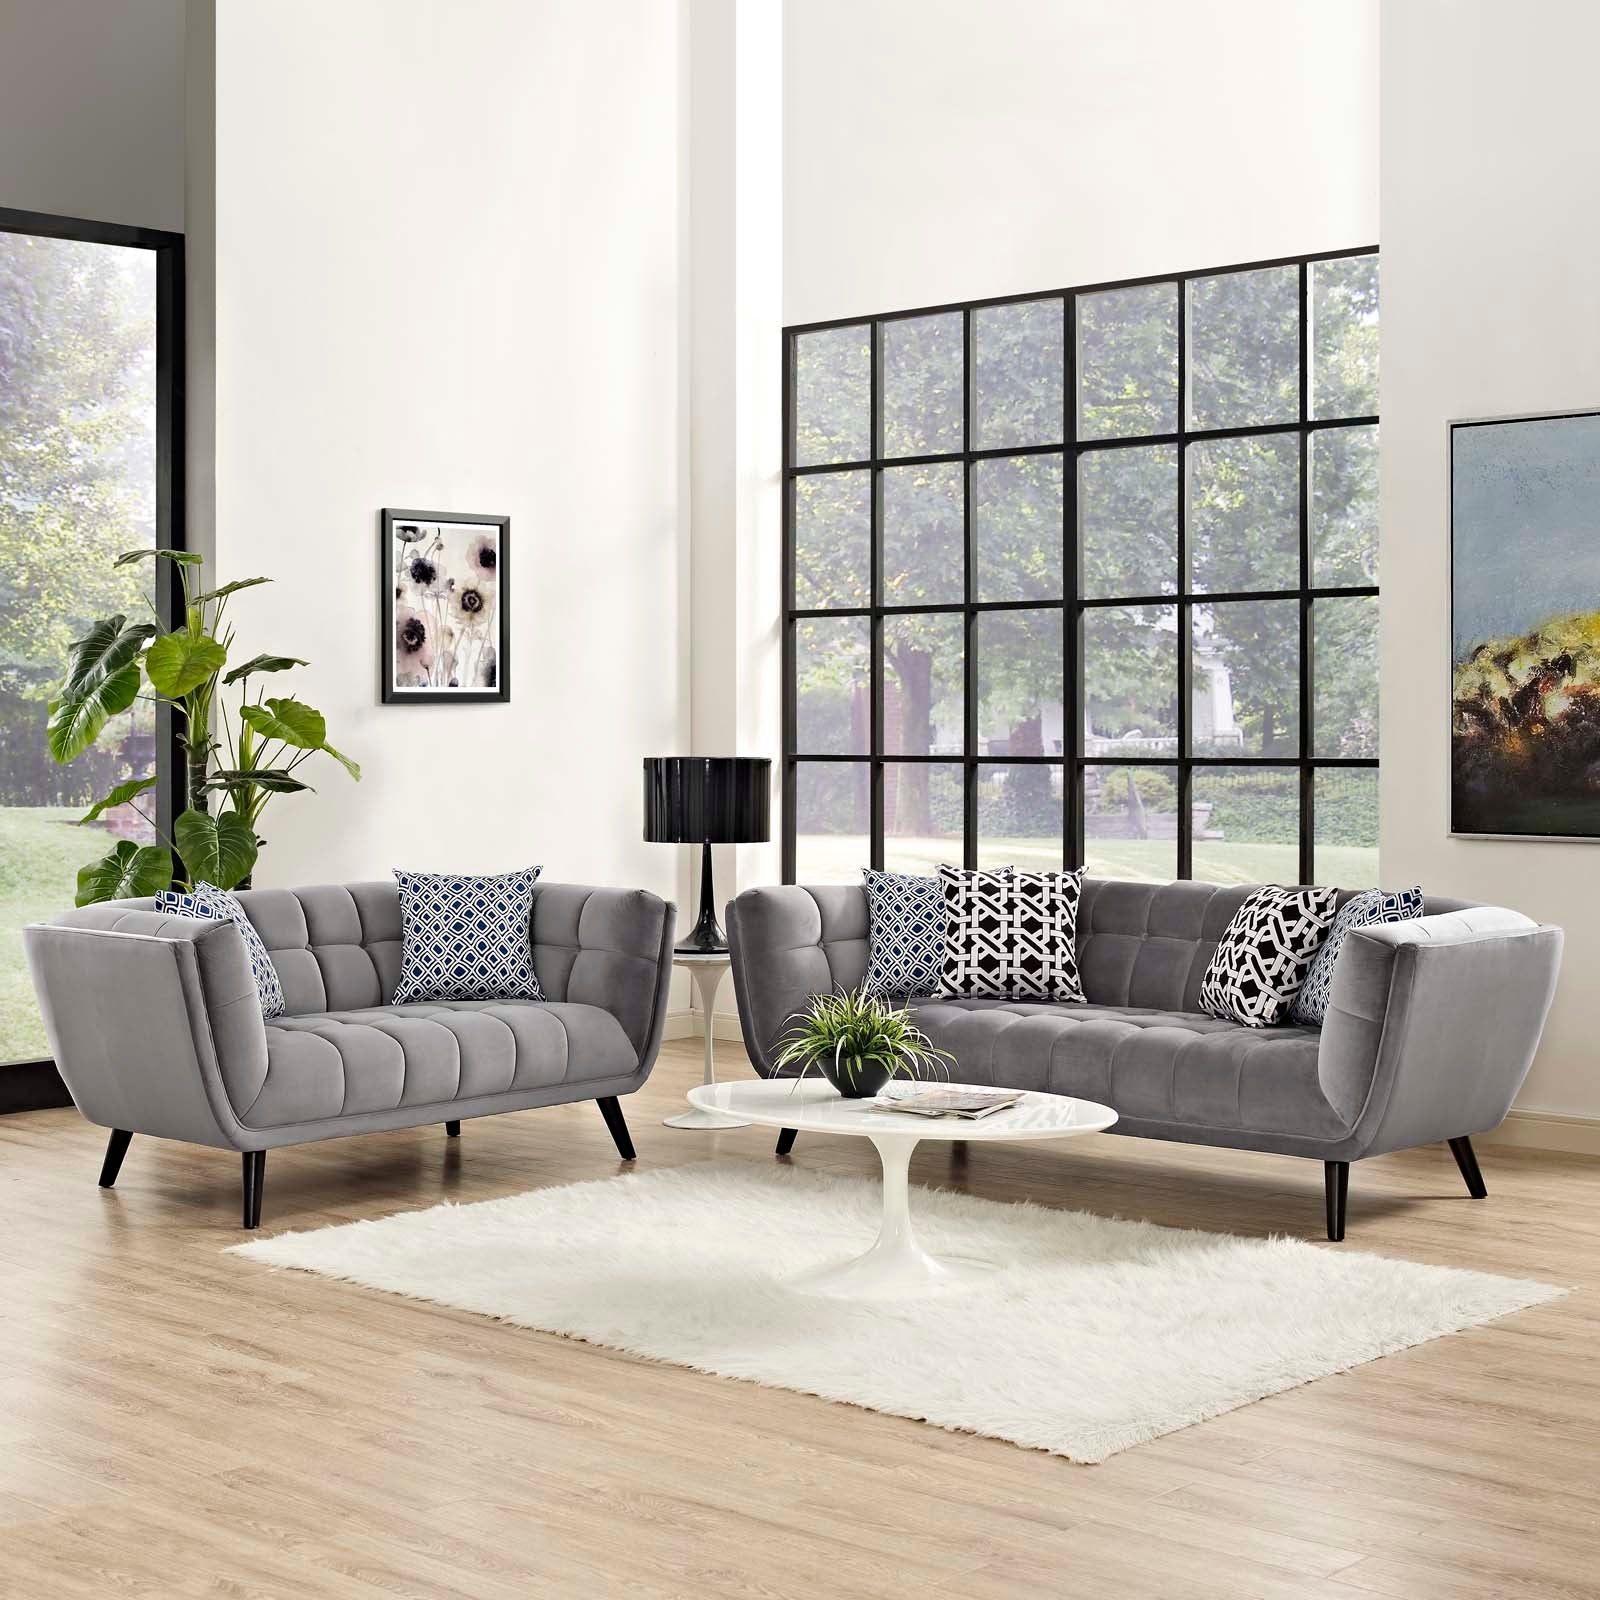 Modway Sofas & Couches - Bestow Performance Velvet Sofa and Loveseat Set Gray ( Set of 2 )